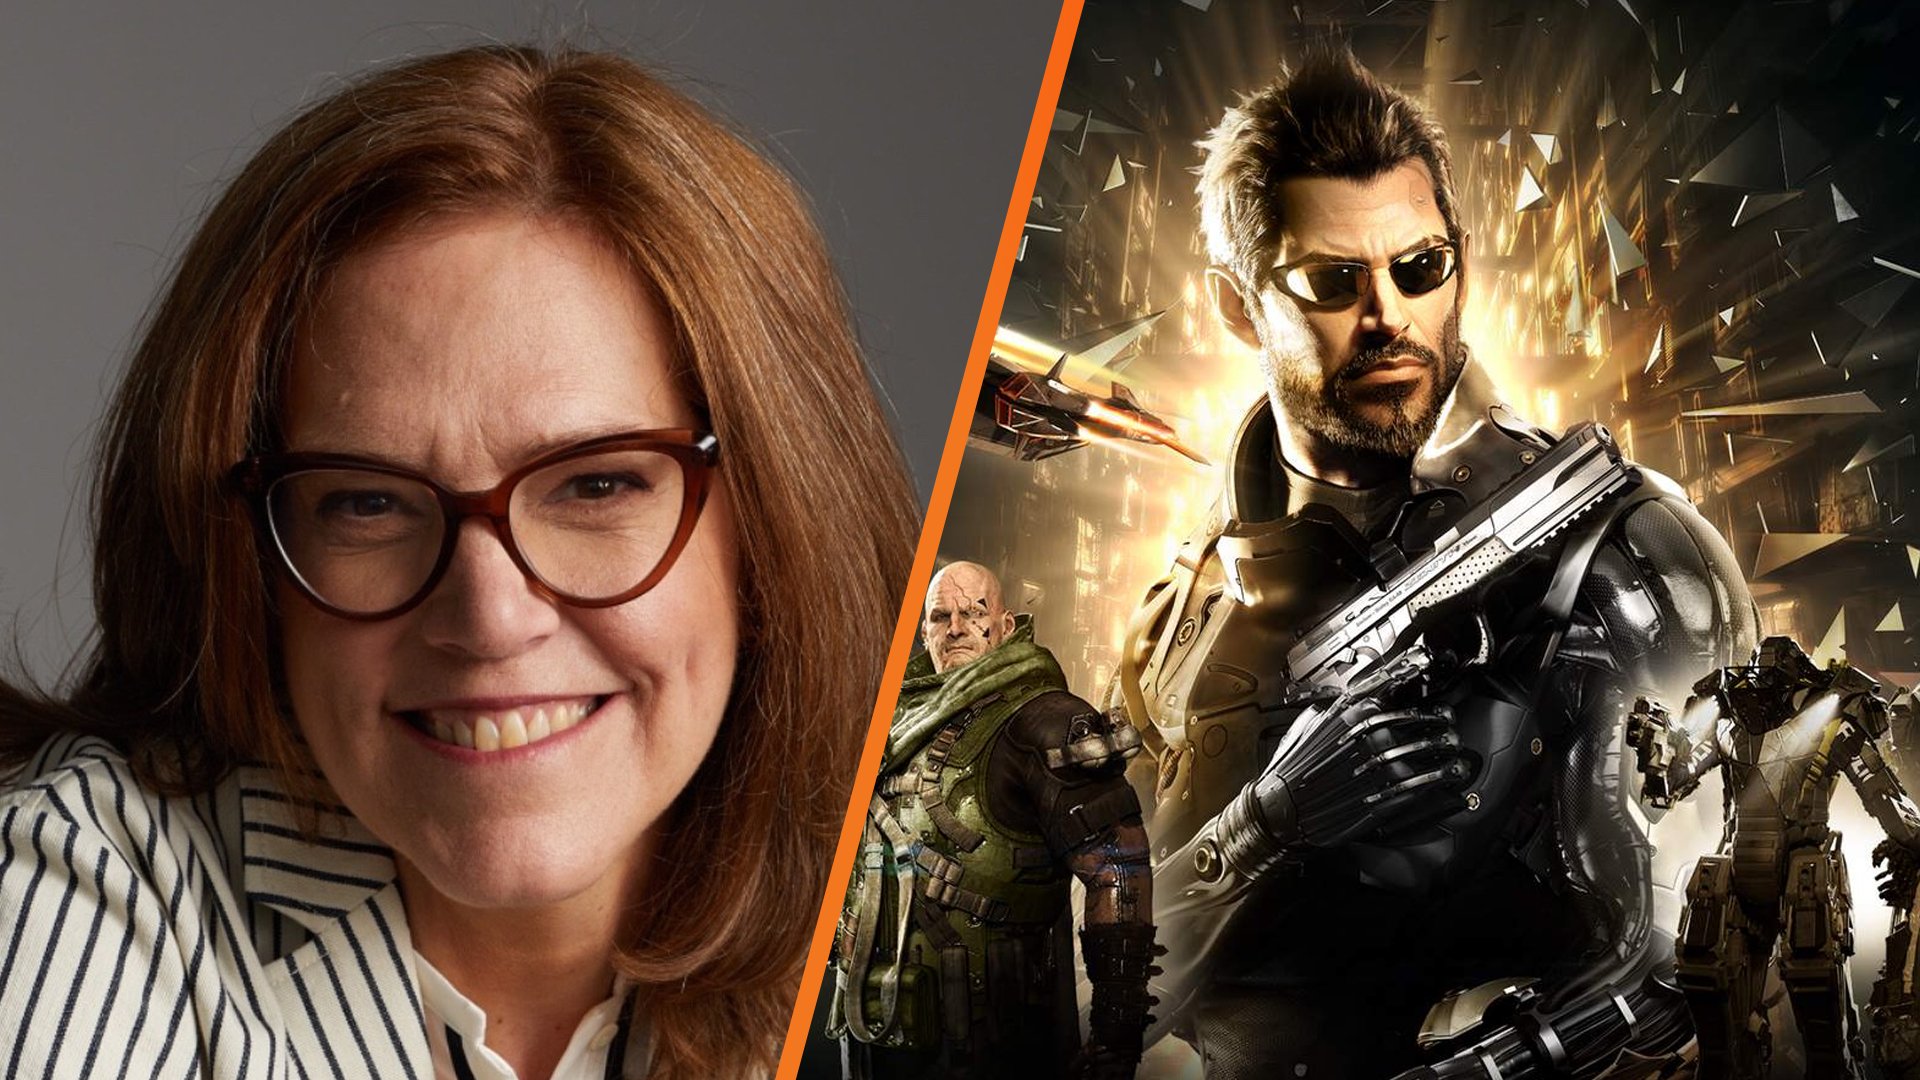 The writer behind Deus Ex has joined BioWare | VGC - Video Games Chronicle